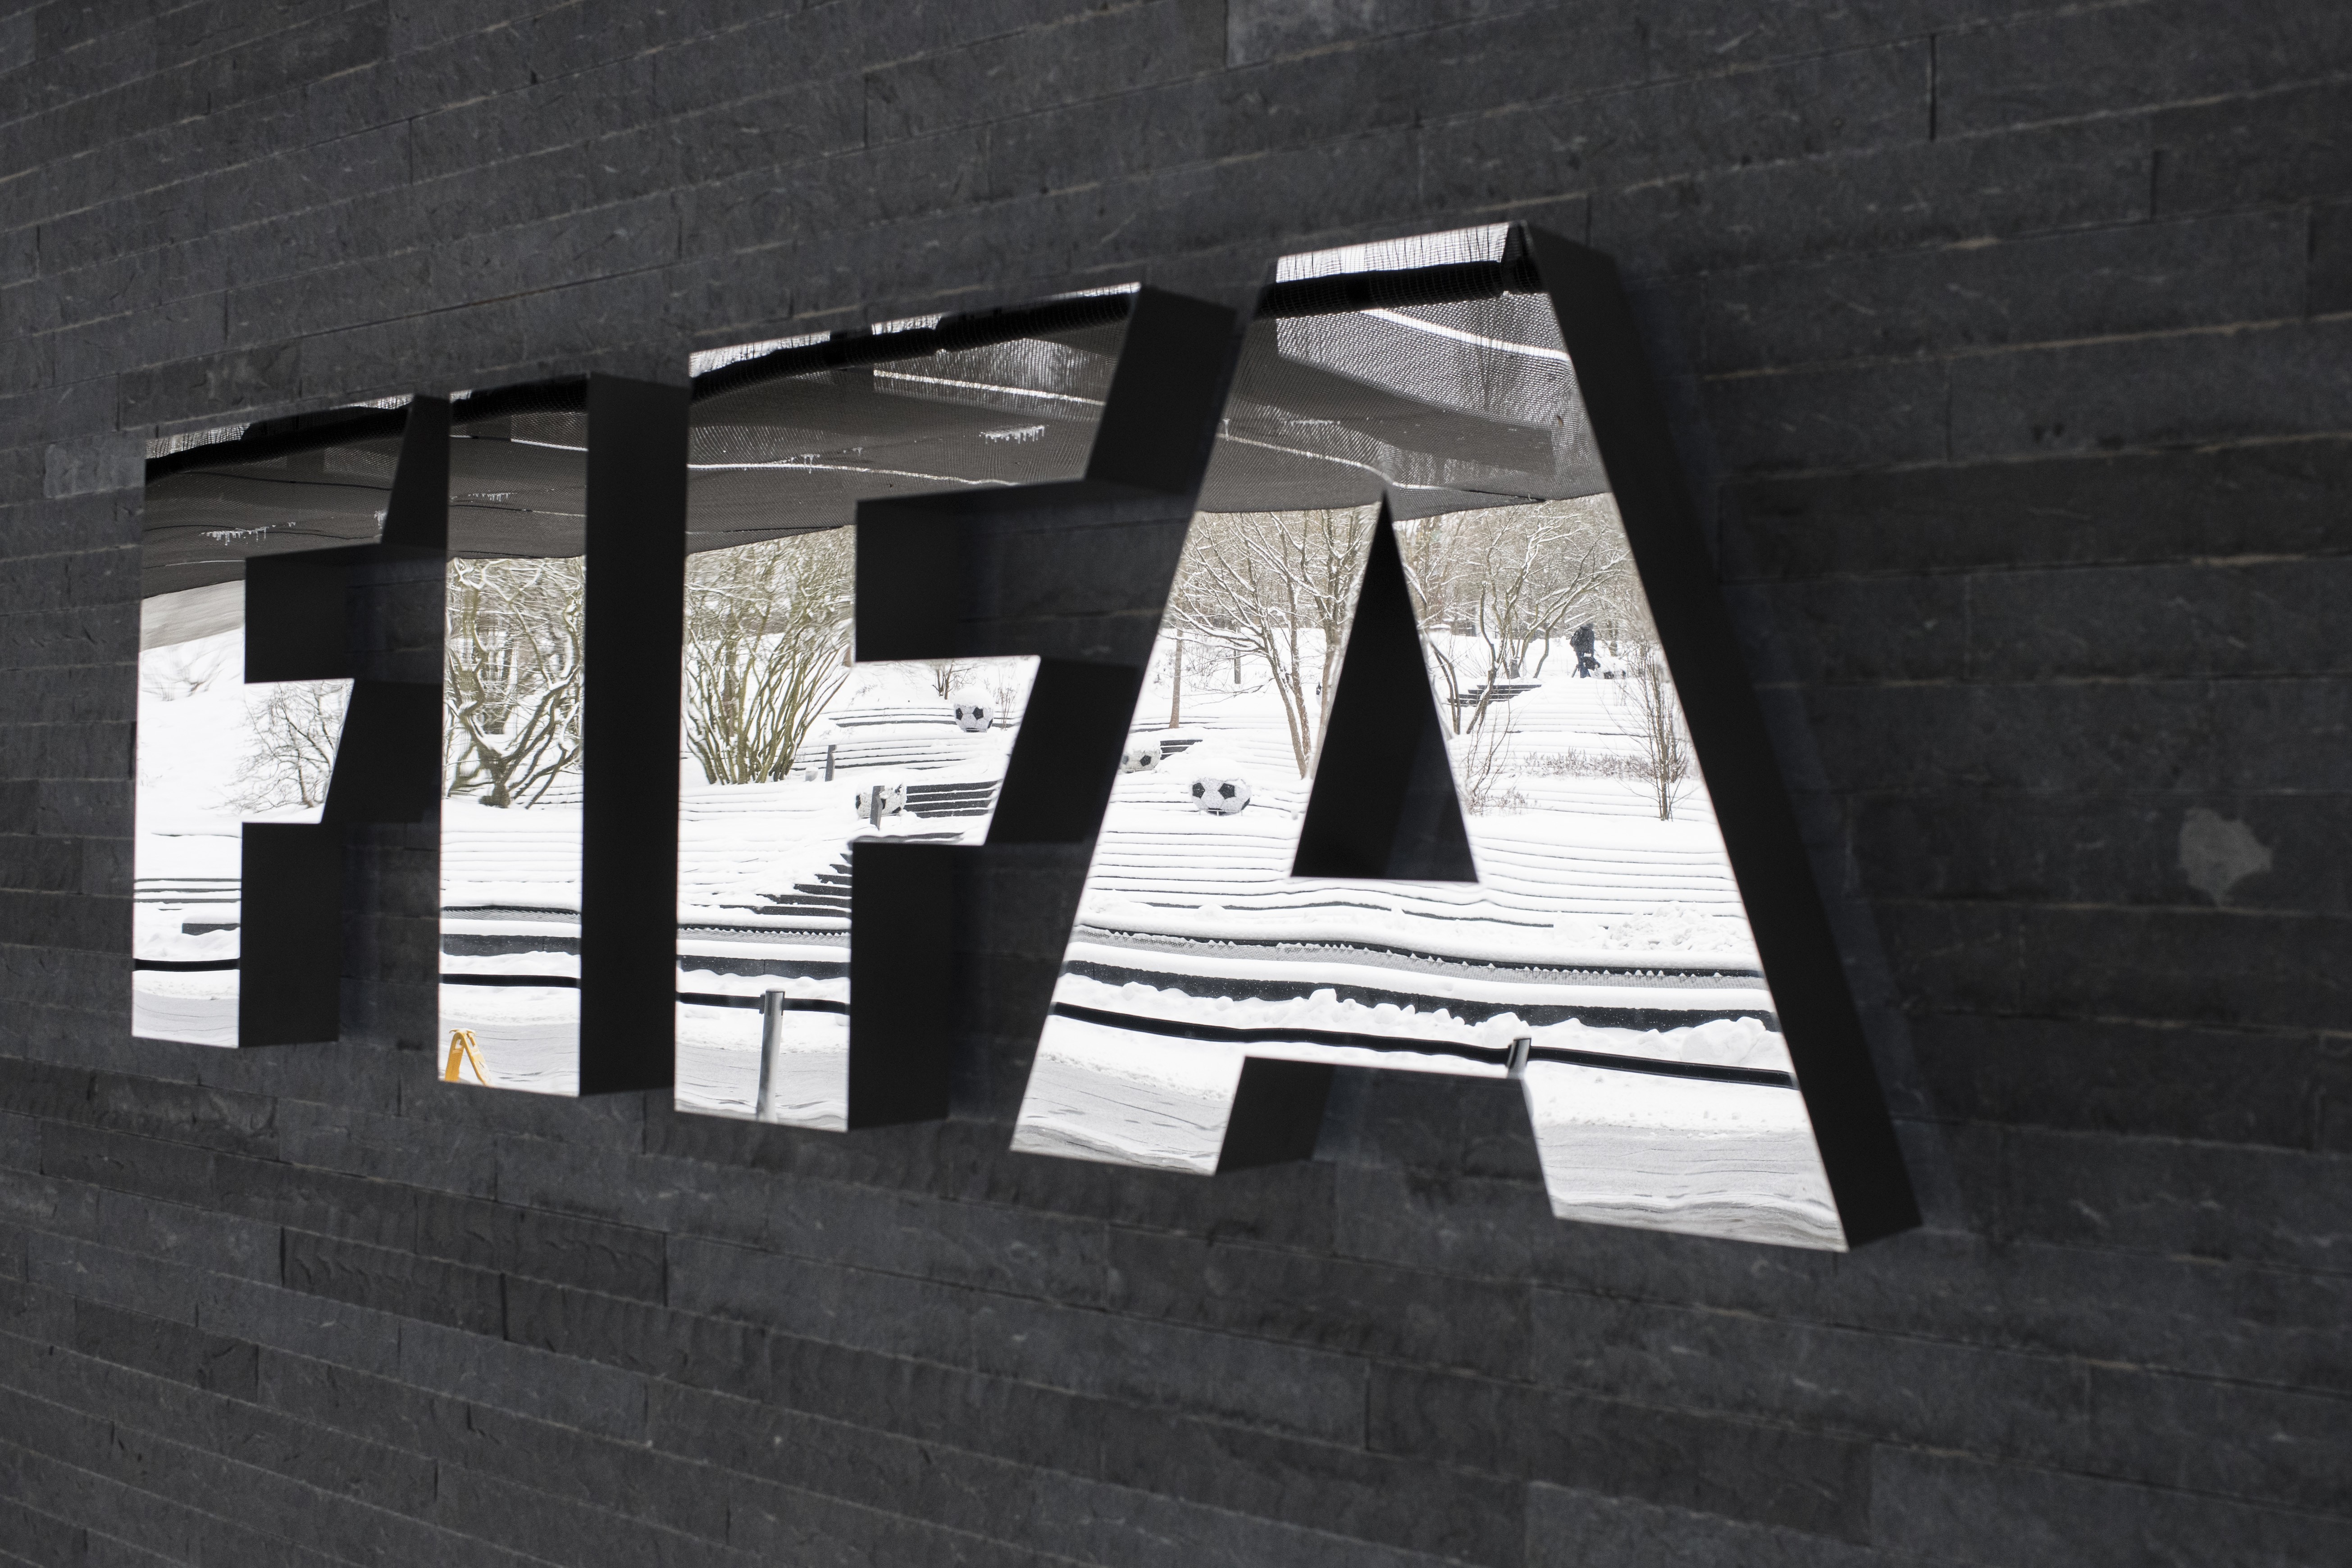 Fifa against finds itself embroiled in accusations of impropriety. Photo: AP